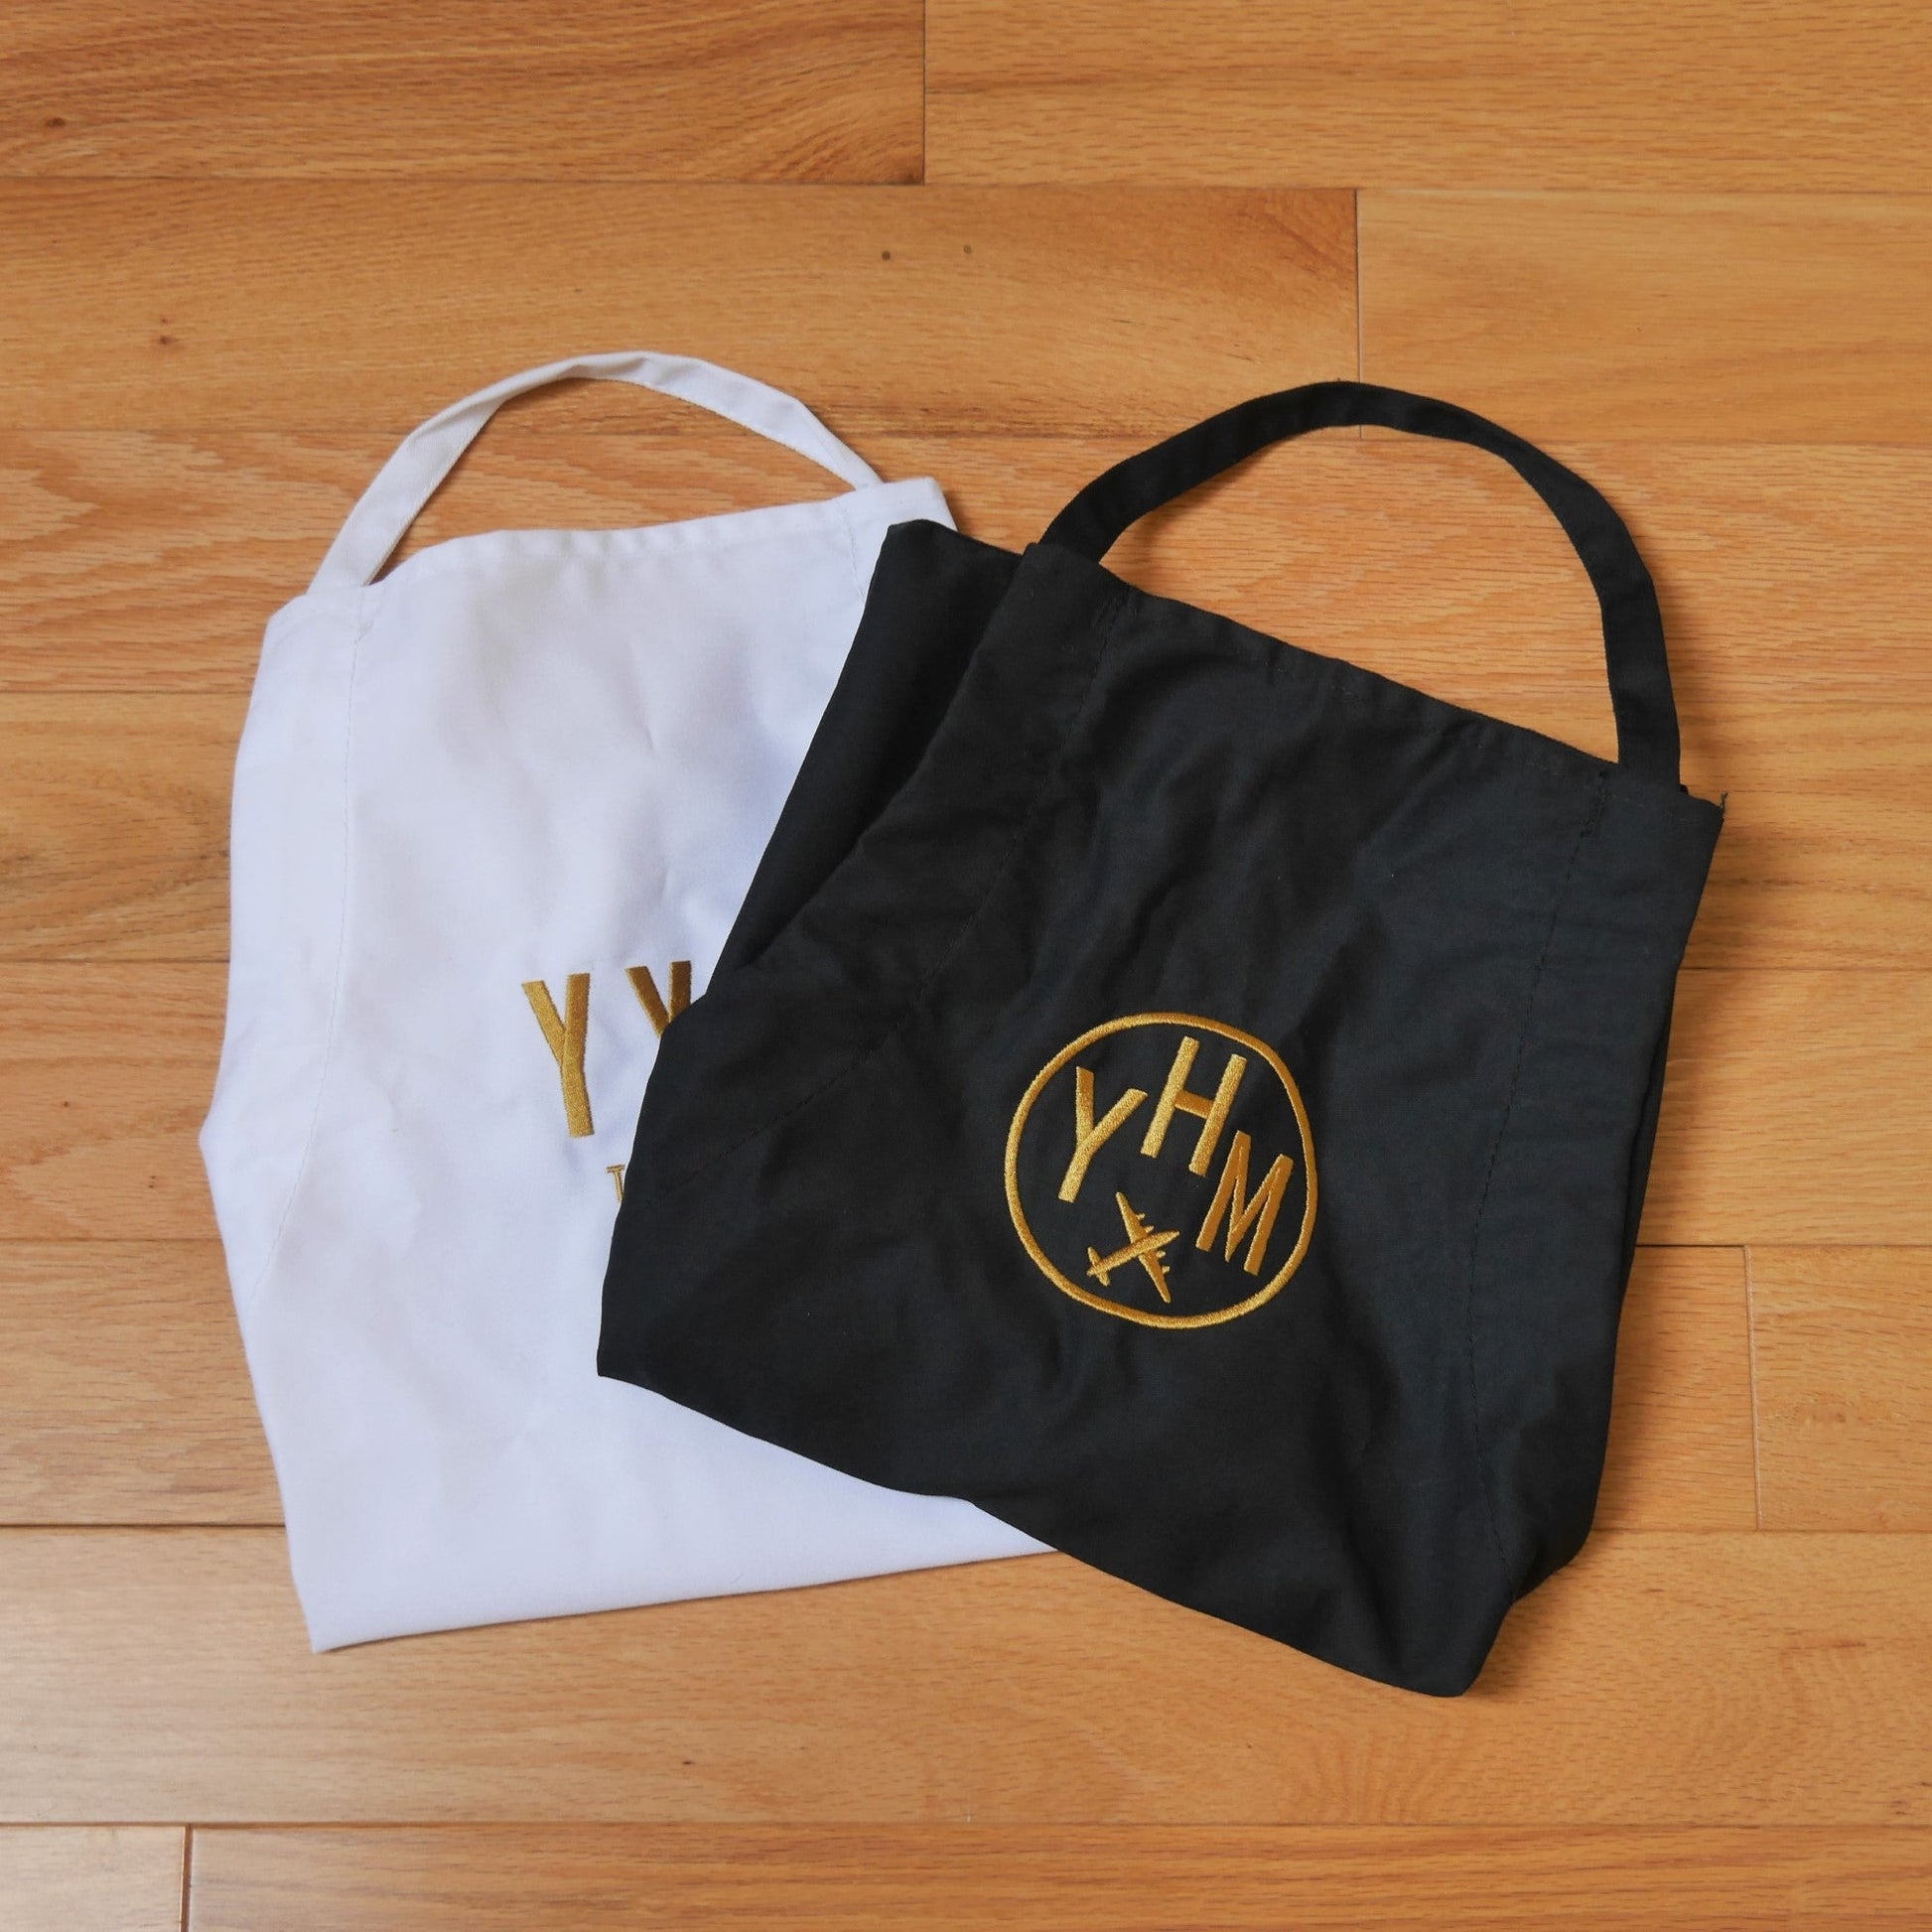 City Embroidered Apron - Old Gold • SFO San Francisco • YHM Designs - Image 14